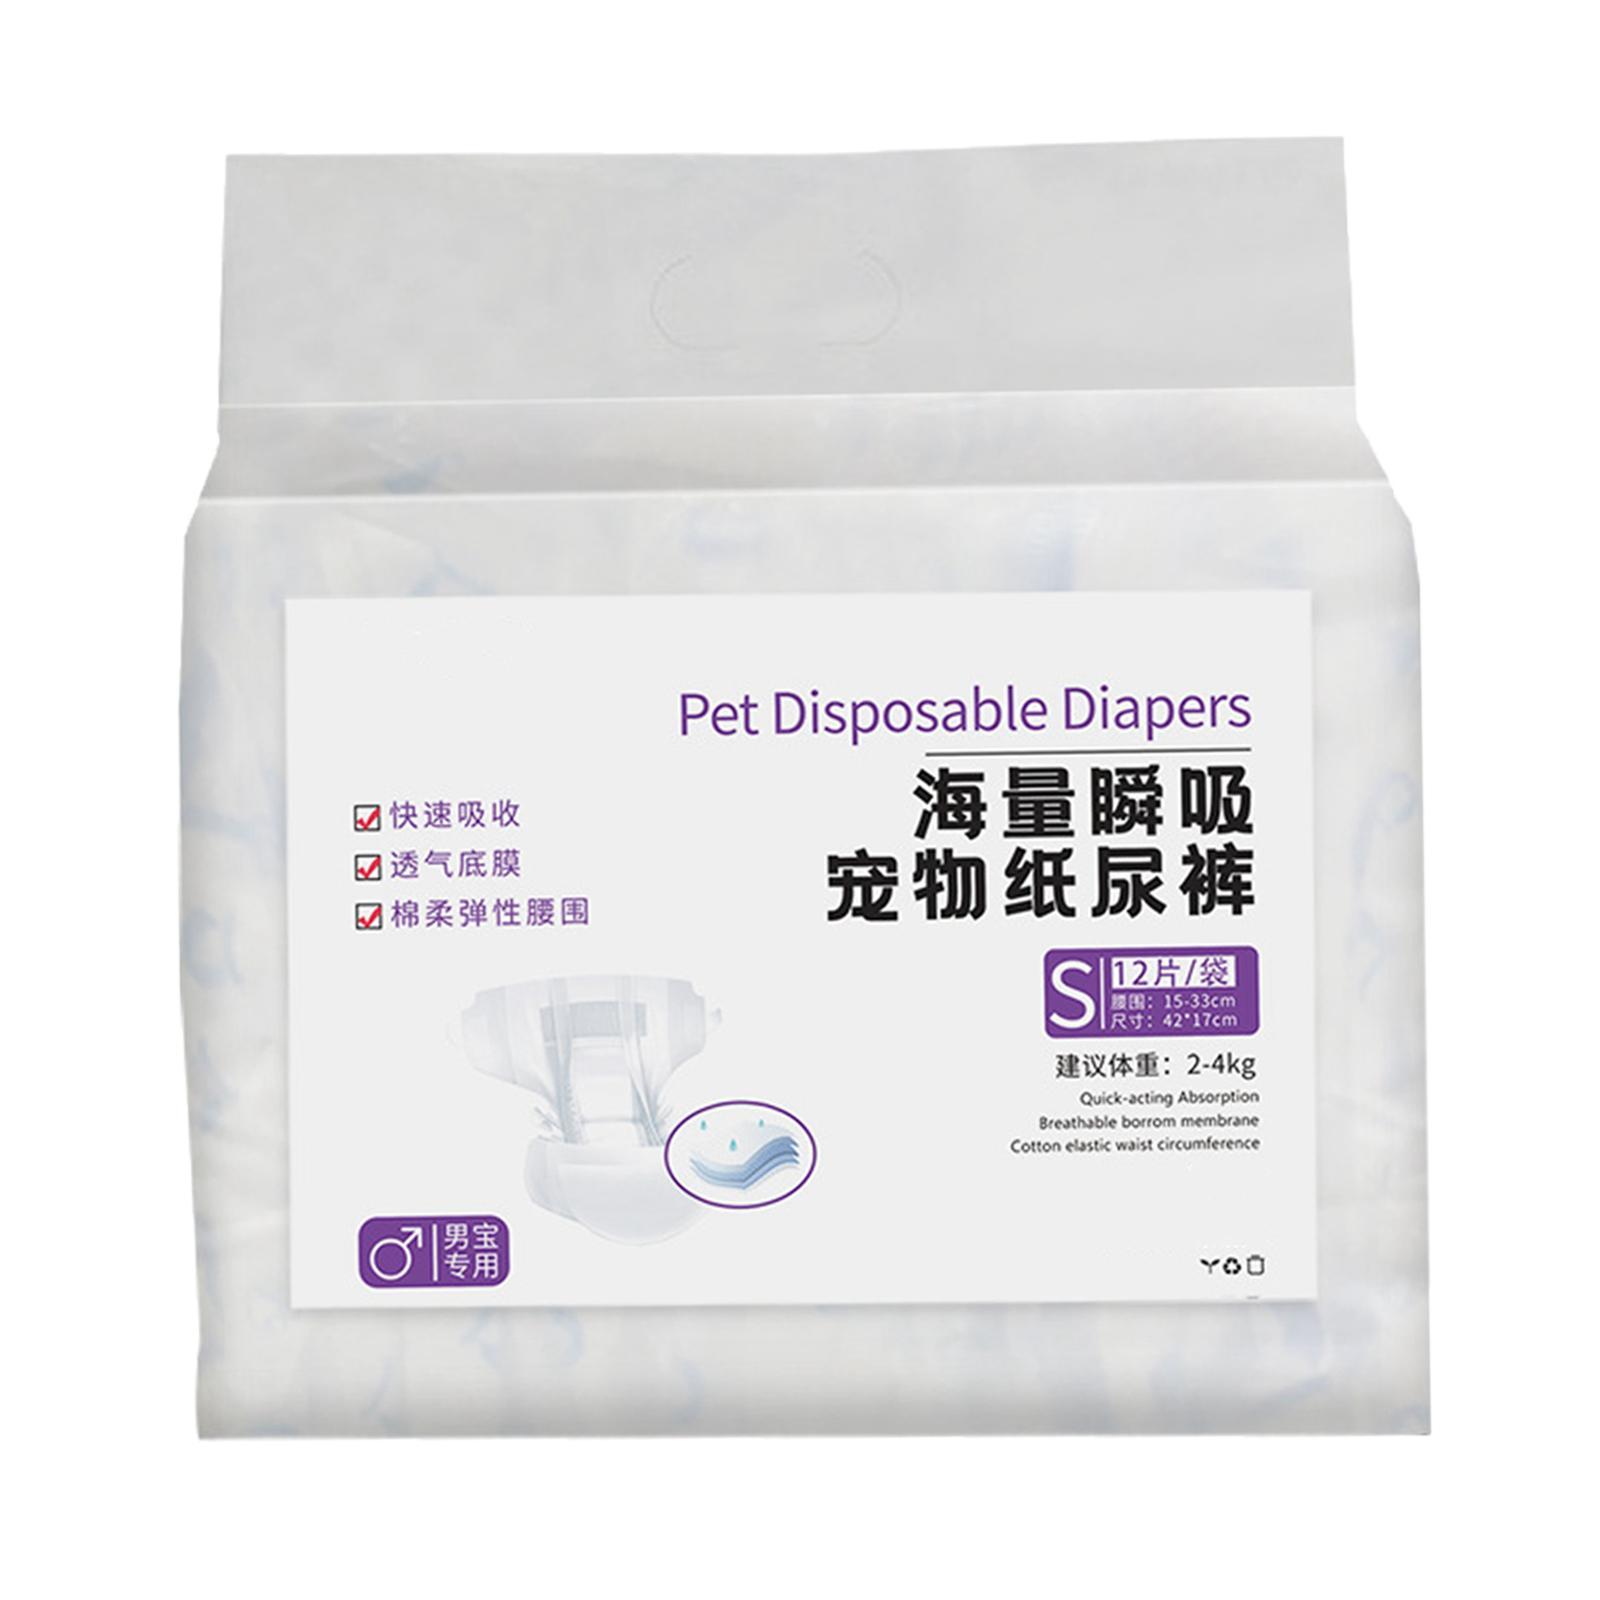 Dog Diaper Soft Super Absorption for Dogs Excitable Urination Incontinence